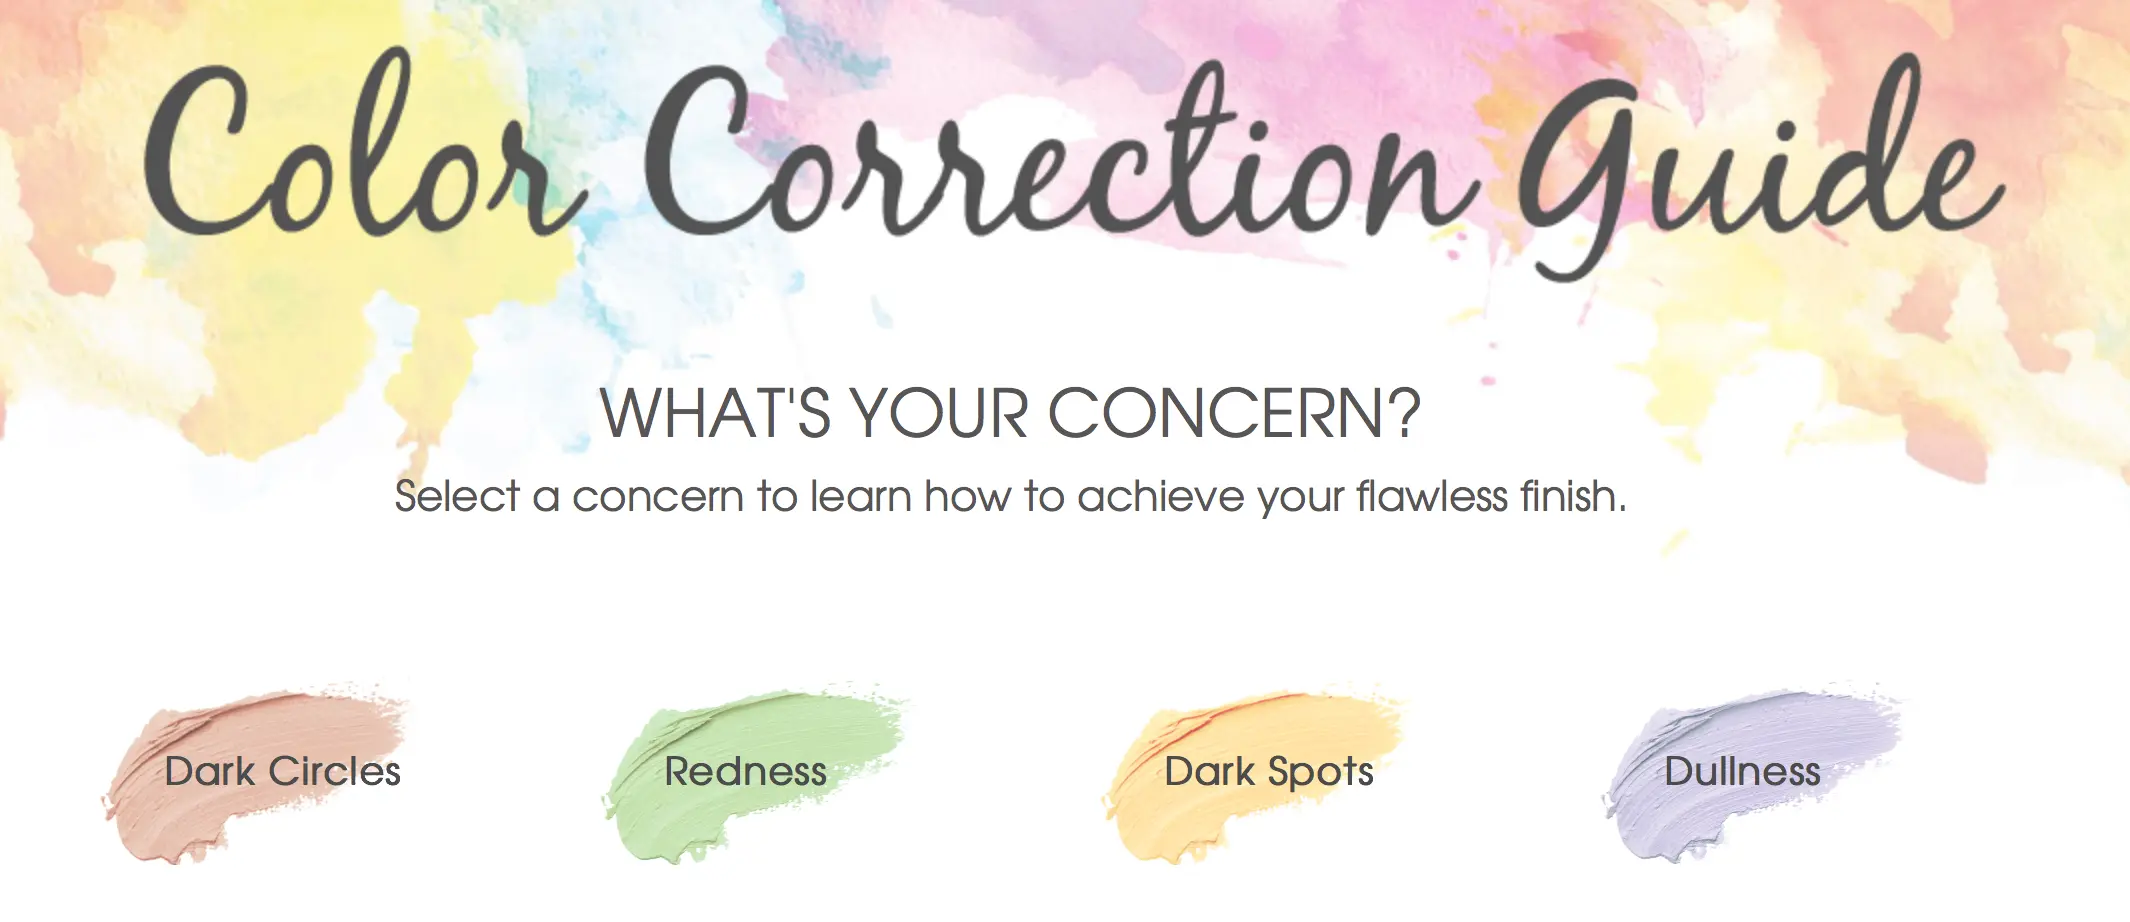 Colour Correction in Makeup and Hairstyling Enhance With Precision (2)